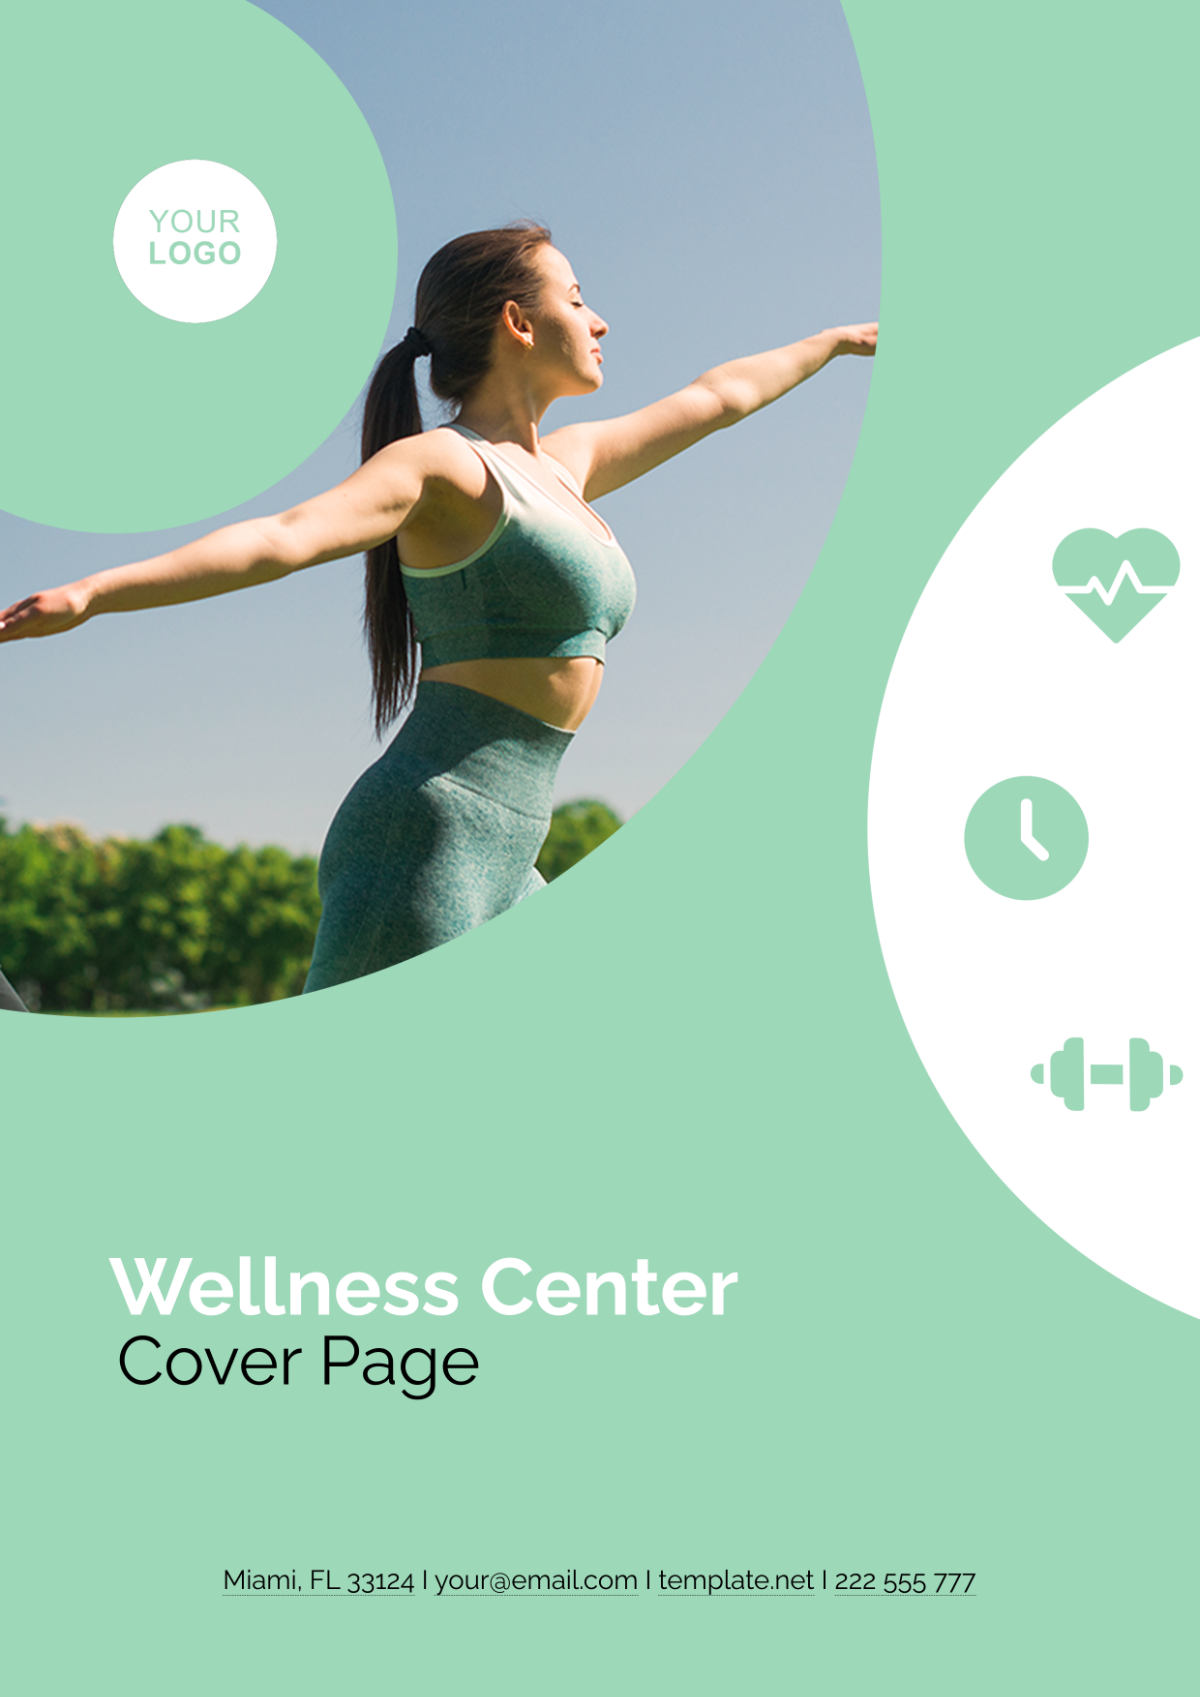 Wellness Center Cover Page Address Template